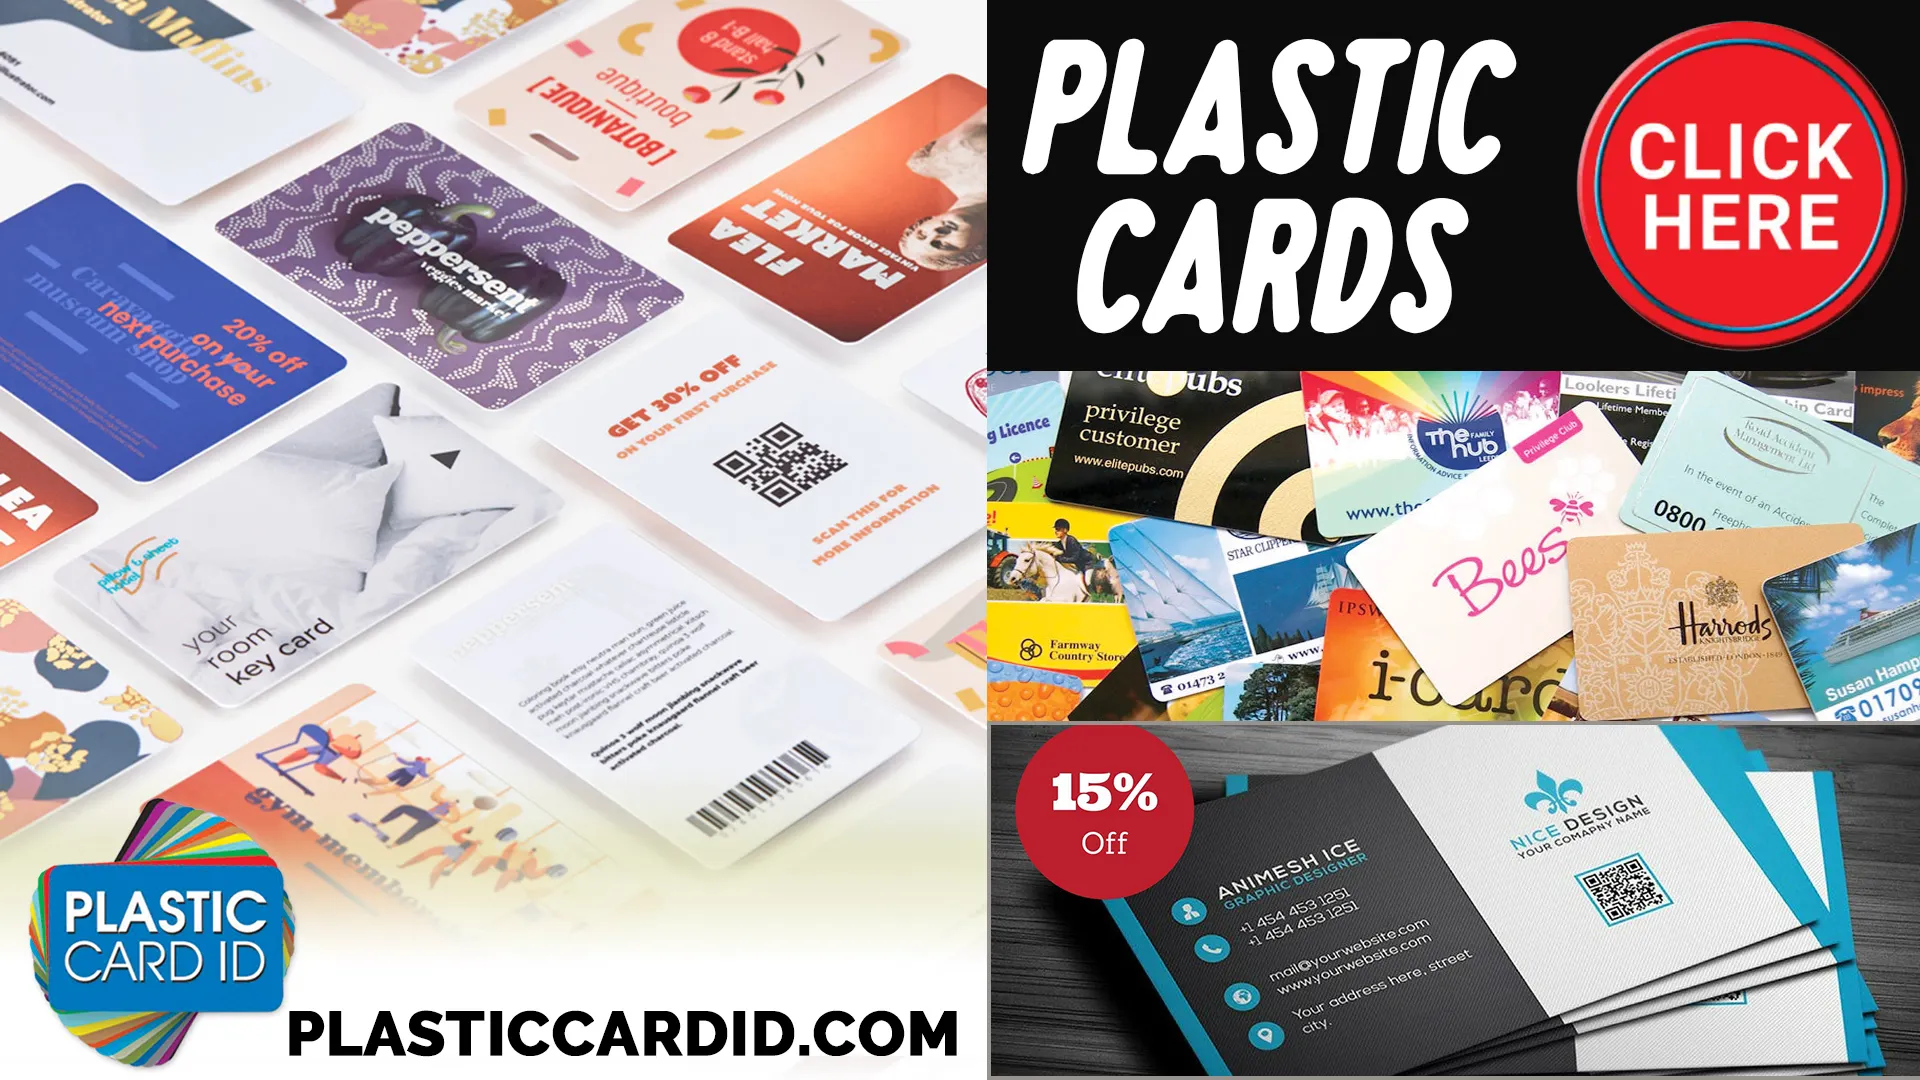 Why Plastic Cards?